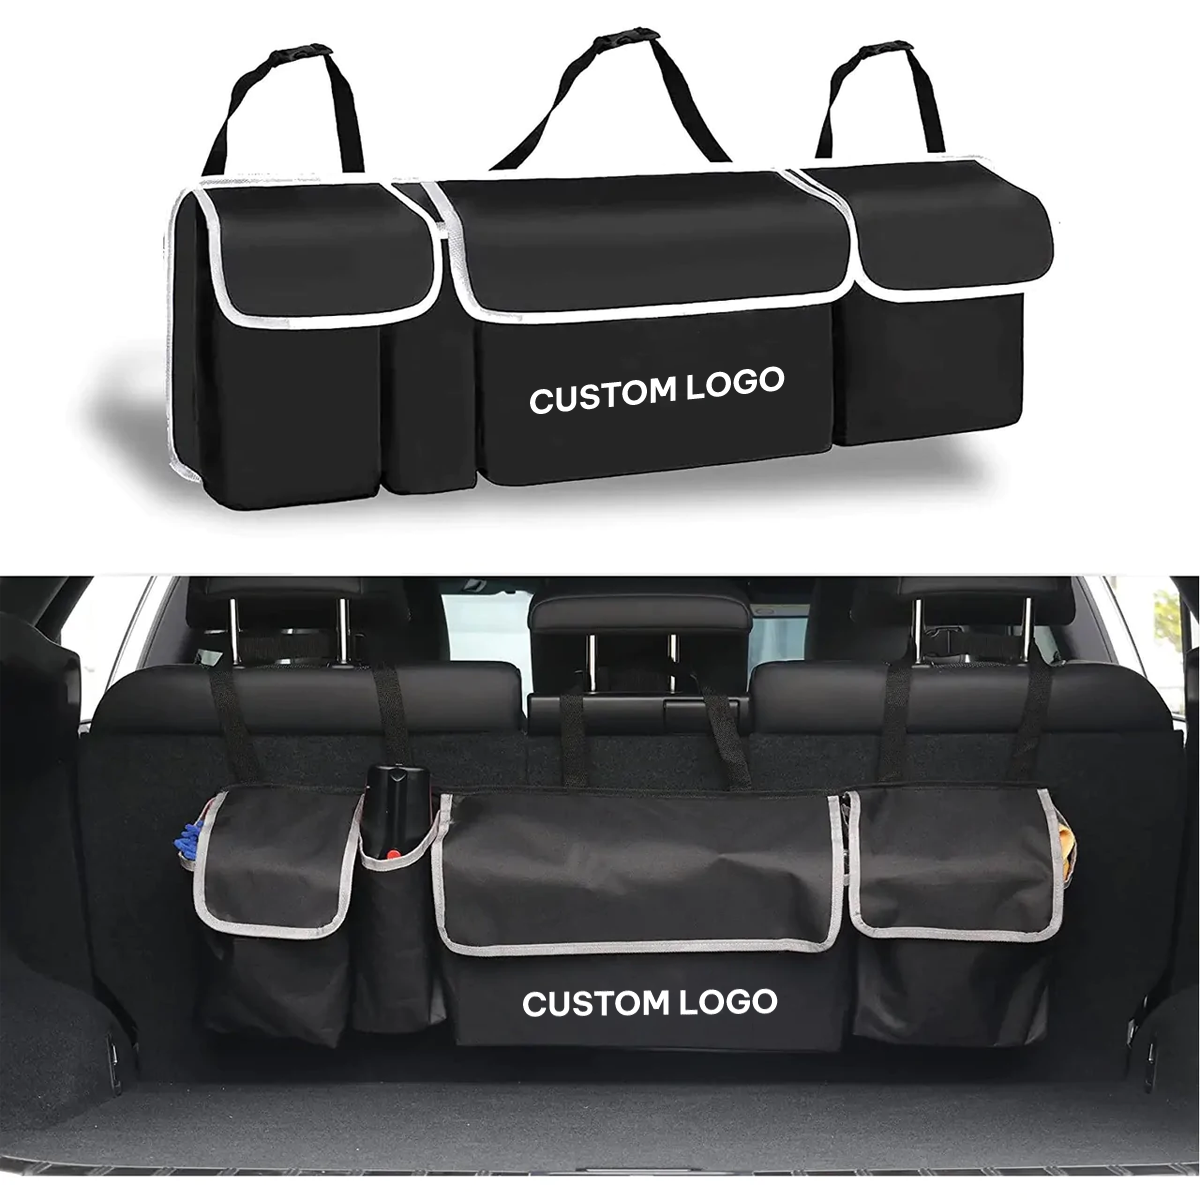 Custom Logo Car Trunk Hanging Organizer, Fit with Volvo, Thick Backseat Trunk Storage Bag with 4 Pockets and 3 Adjustable Shoulder Straps, Foldable Car Trunk Interior Accessories Releases Your Trunk Space